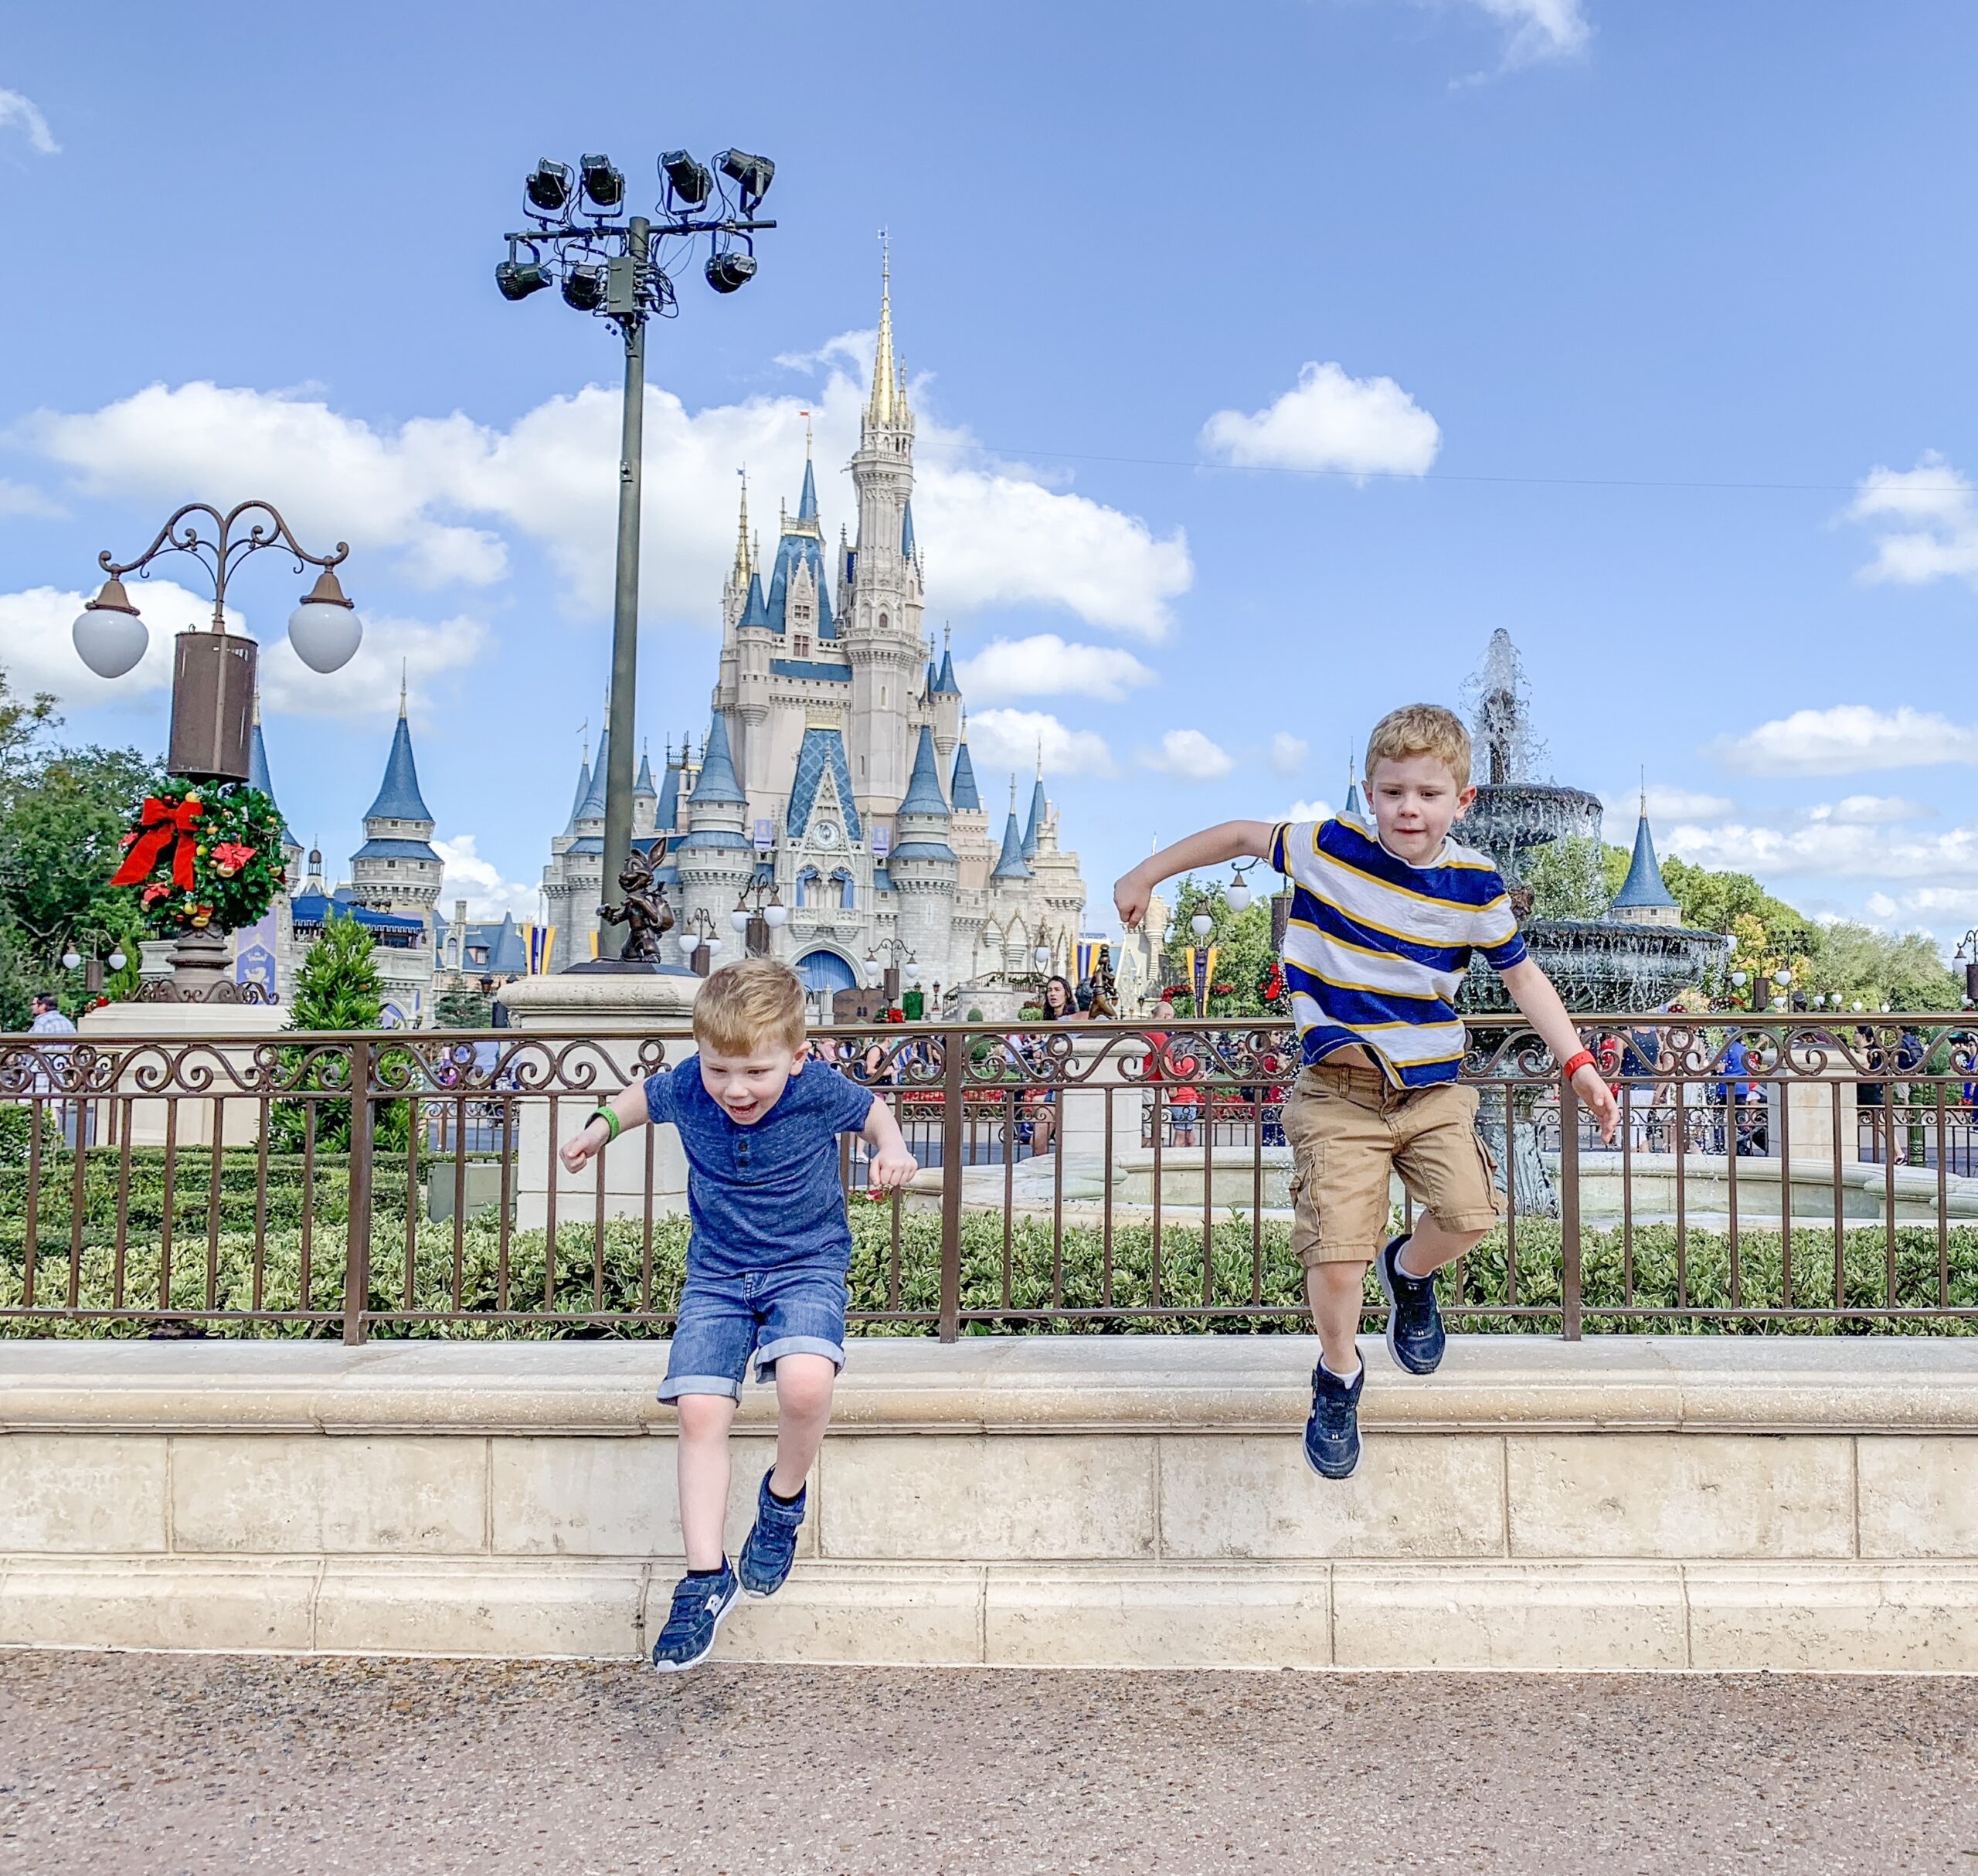 kids jumping off a rail at Disney world with the castle in the background